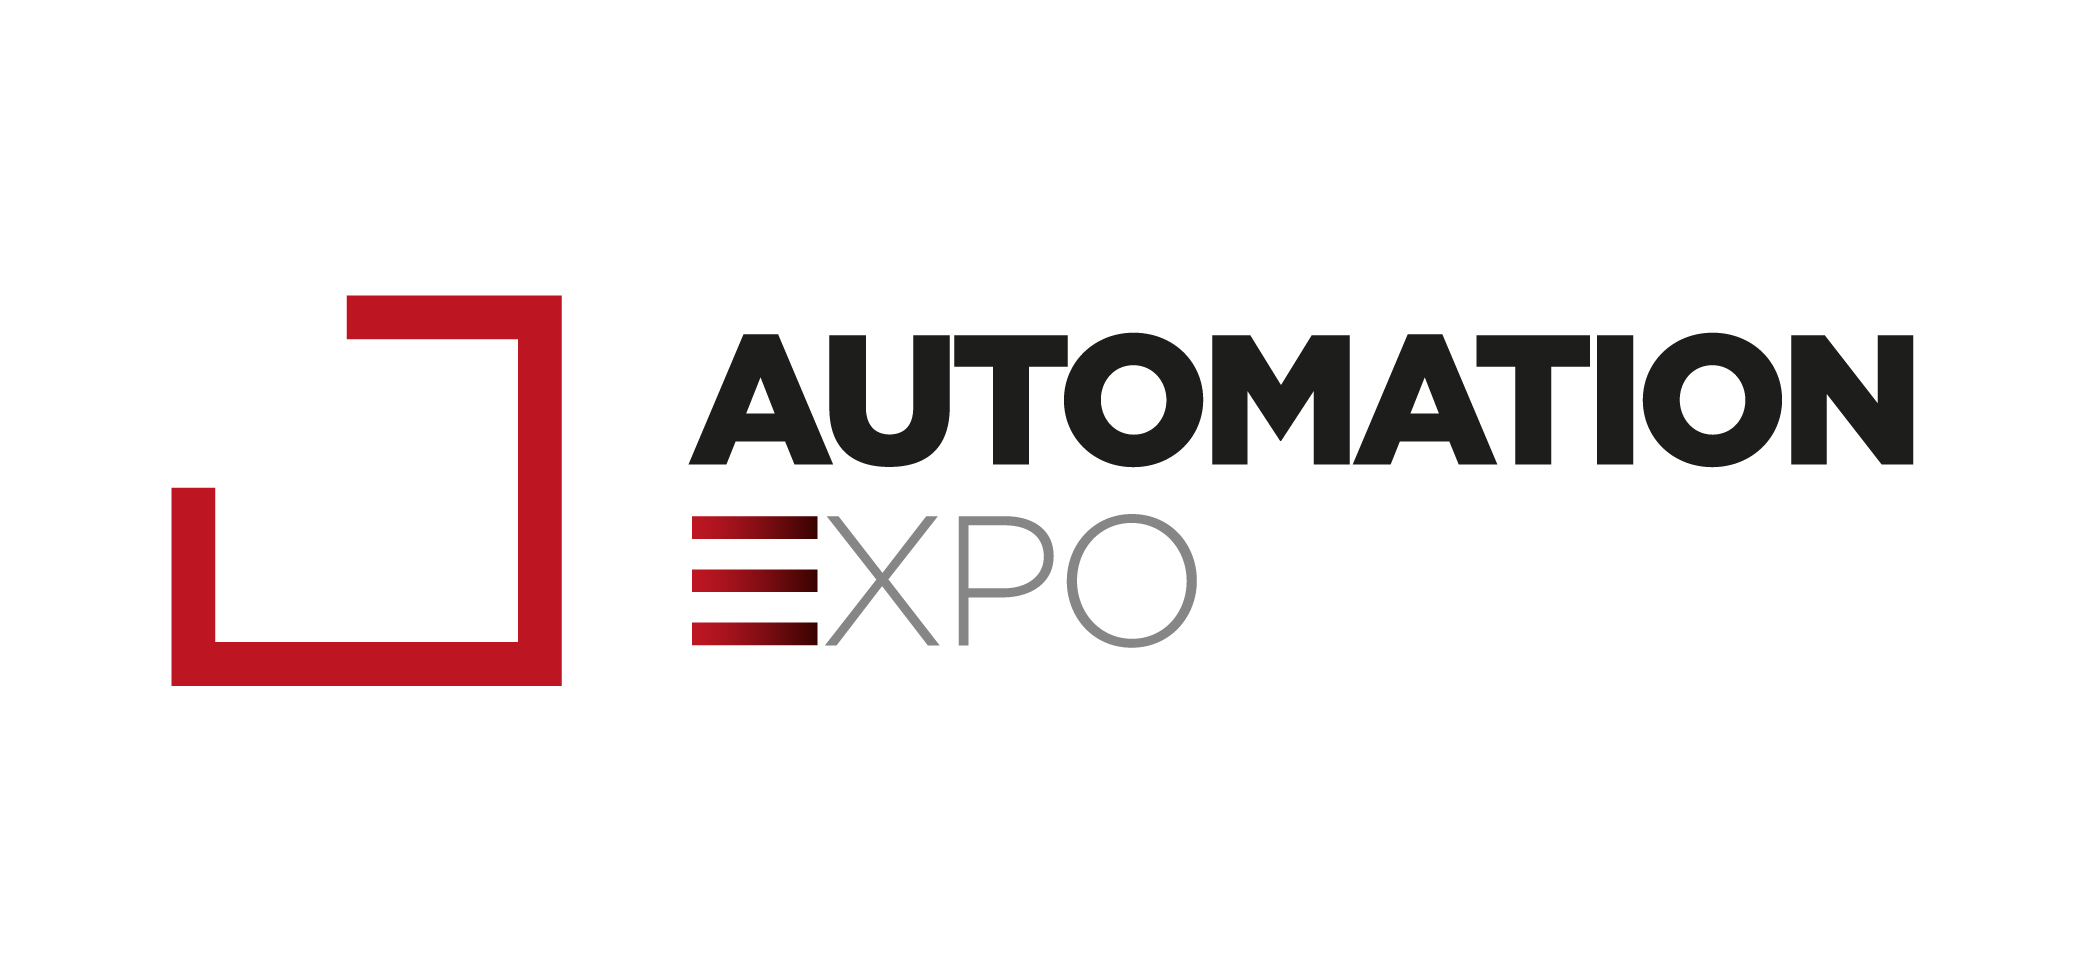 AUTOMATION EXPO 2023